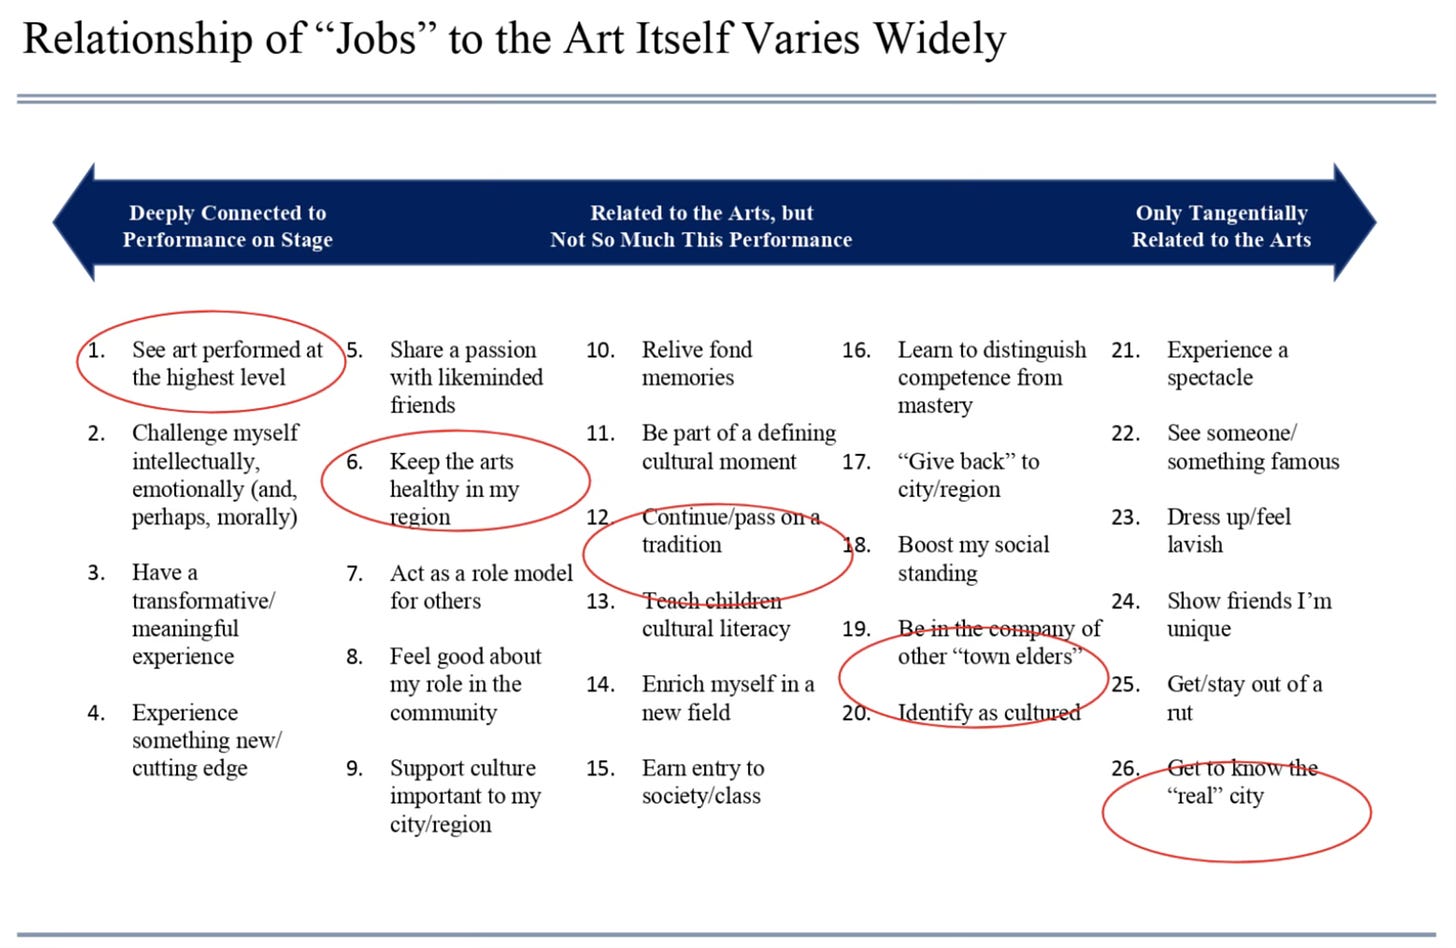 A list of "jobs to be done" among arts audiences, organized by how connected those jobs are to the art experience itself.